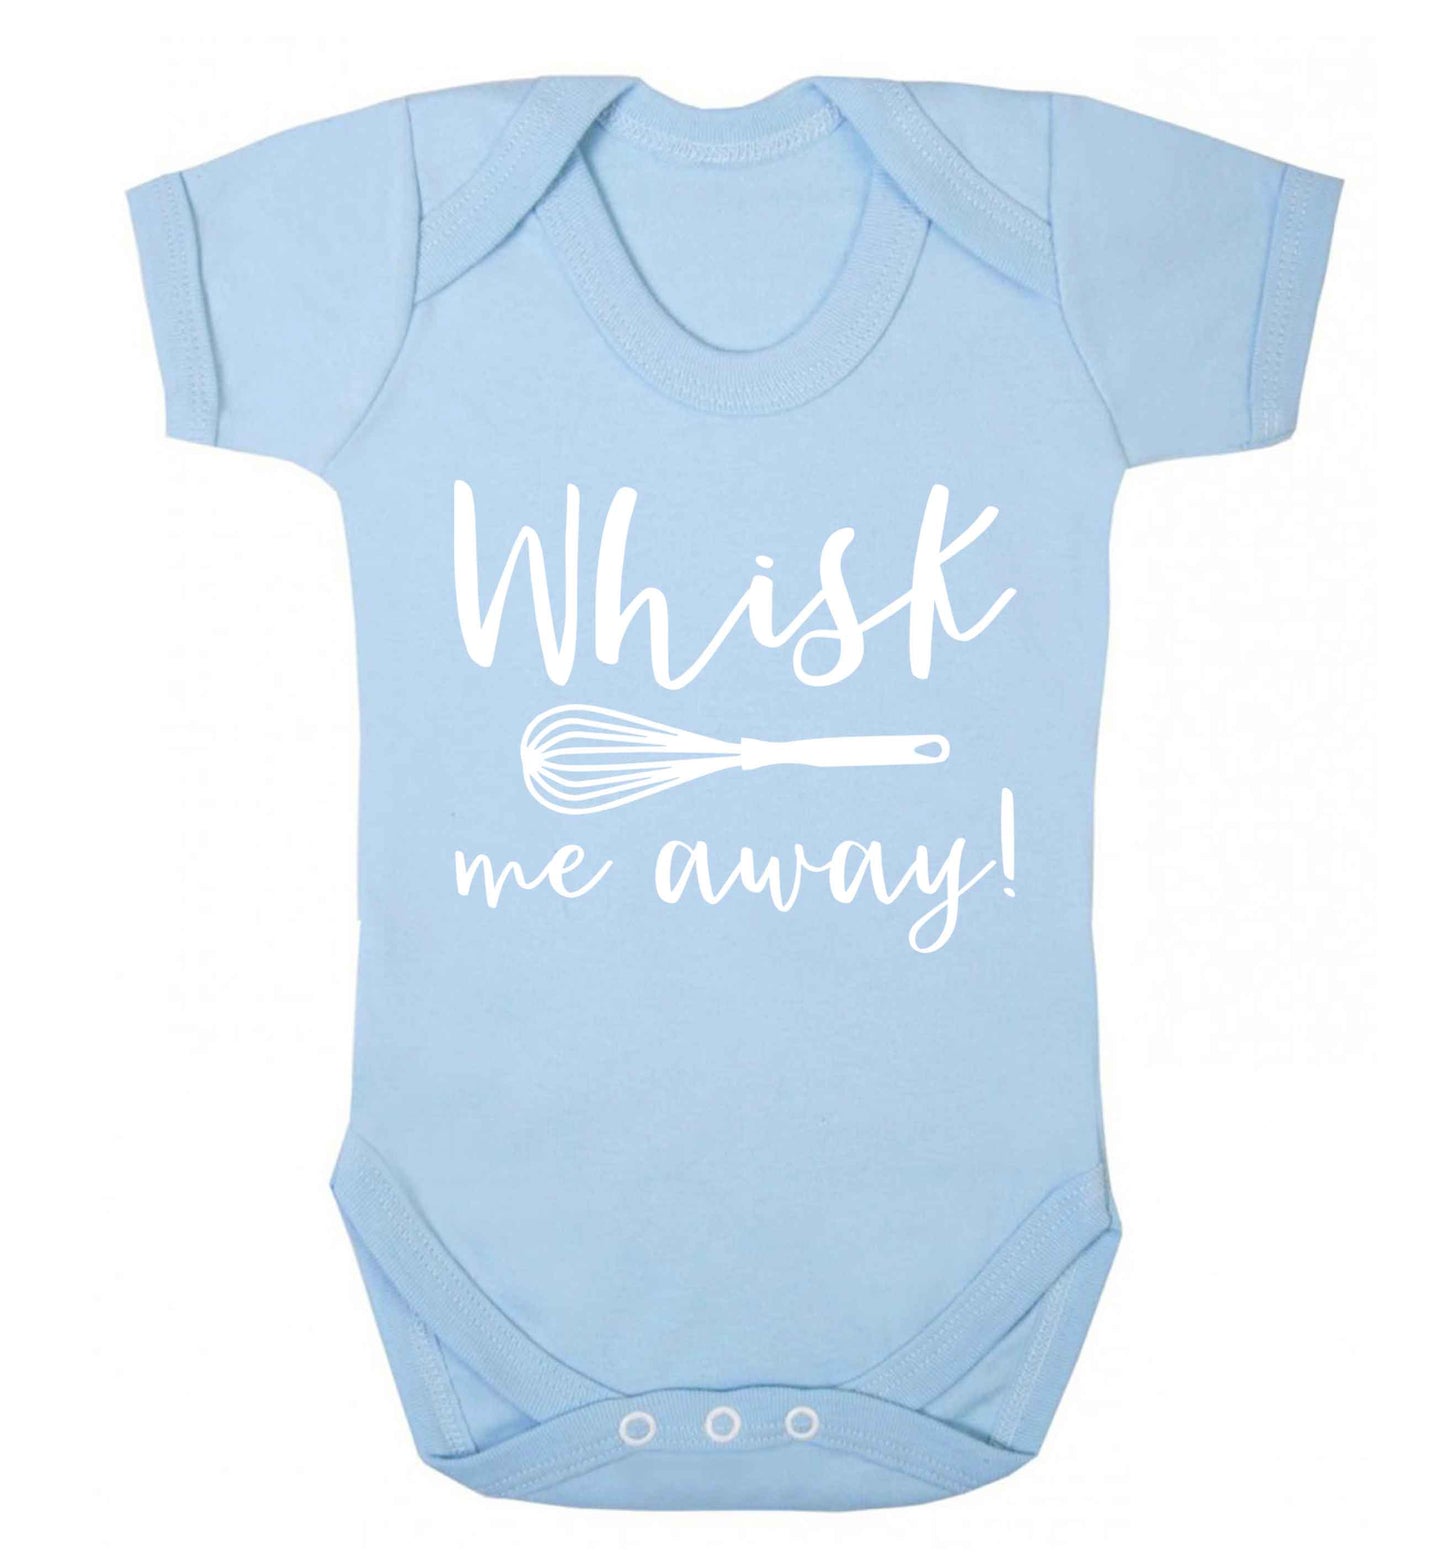 Whisk me away Baby Vest pale blue 18-24 months